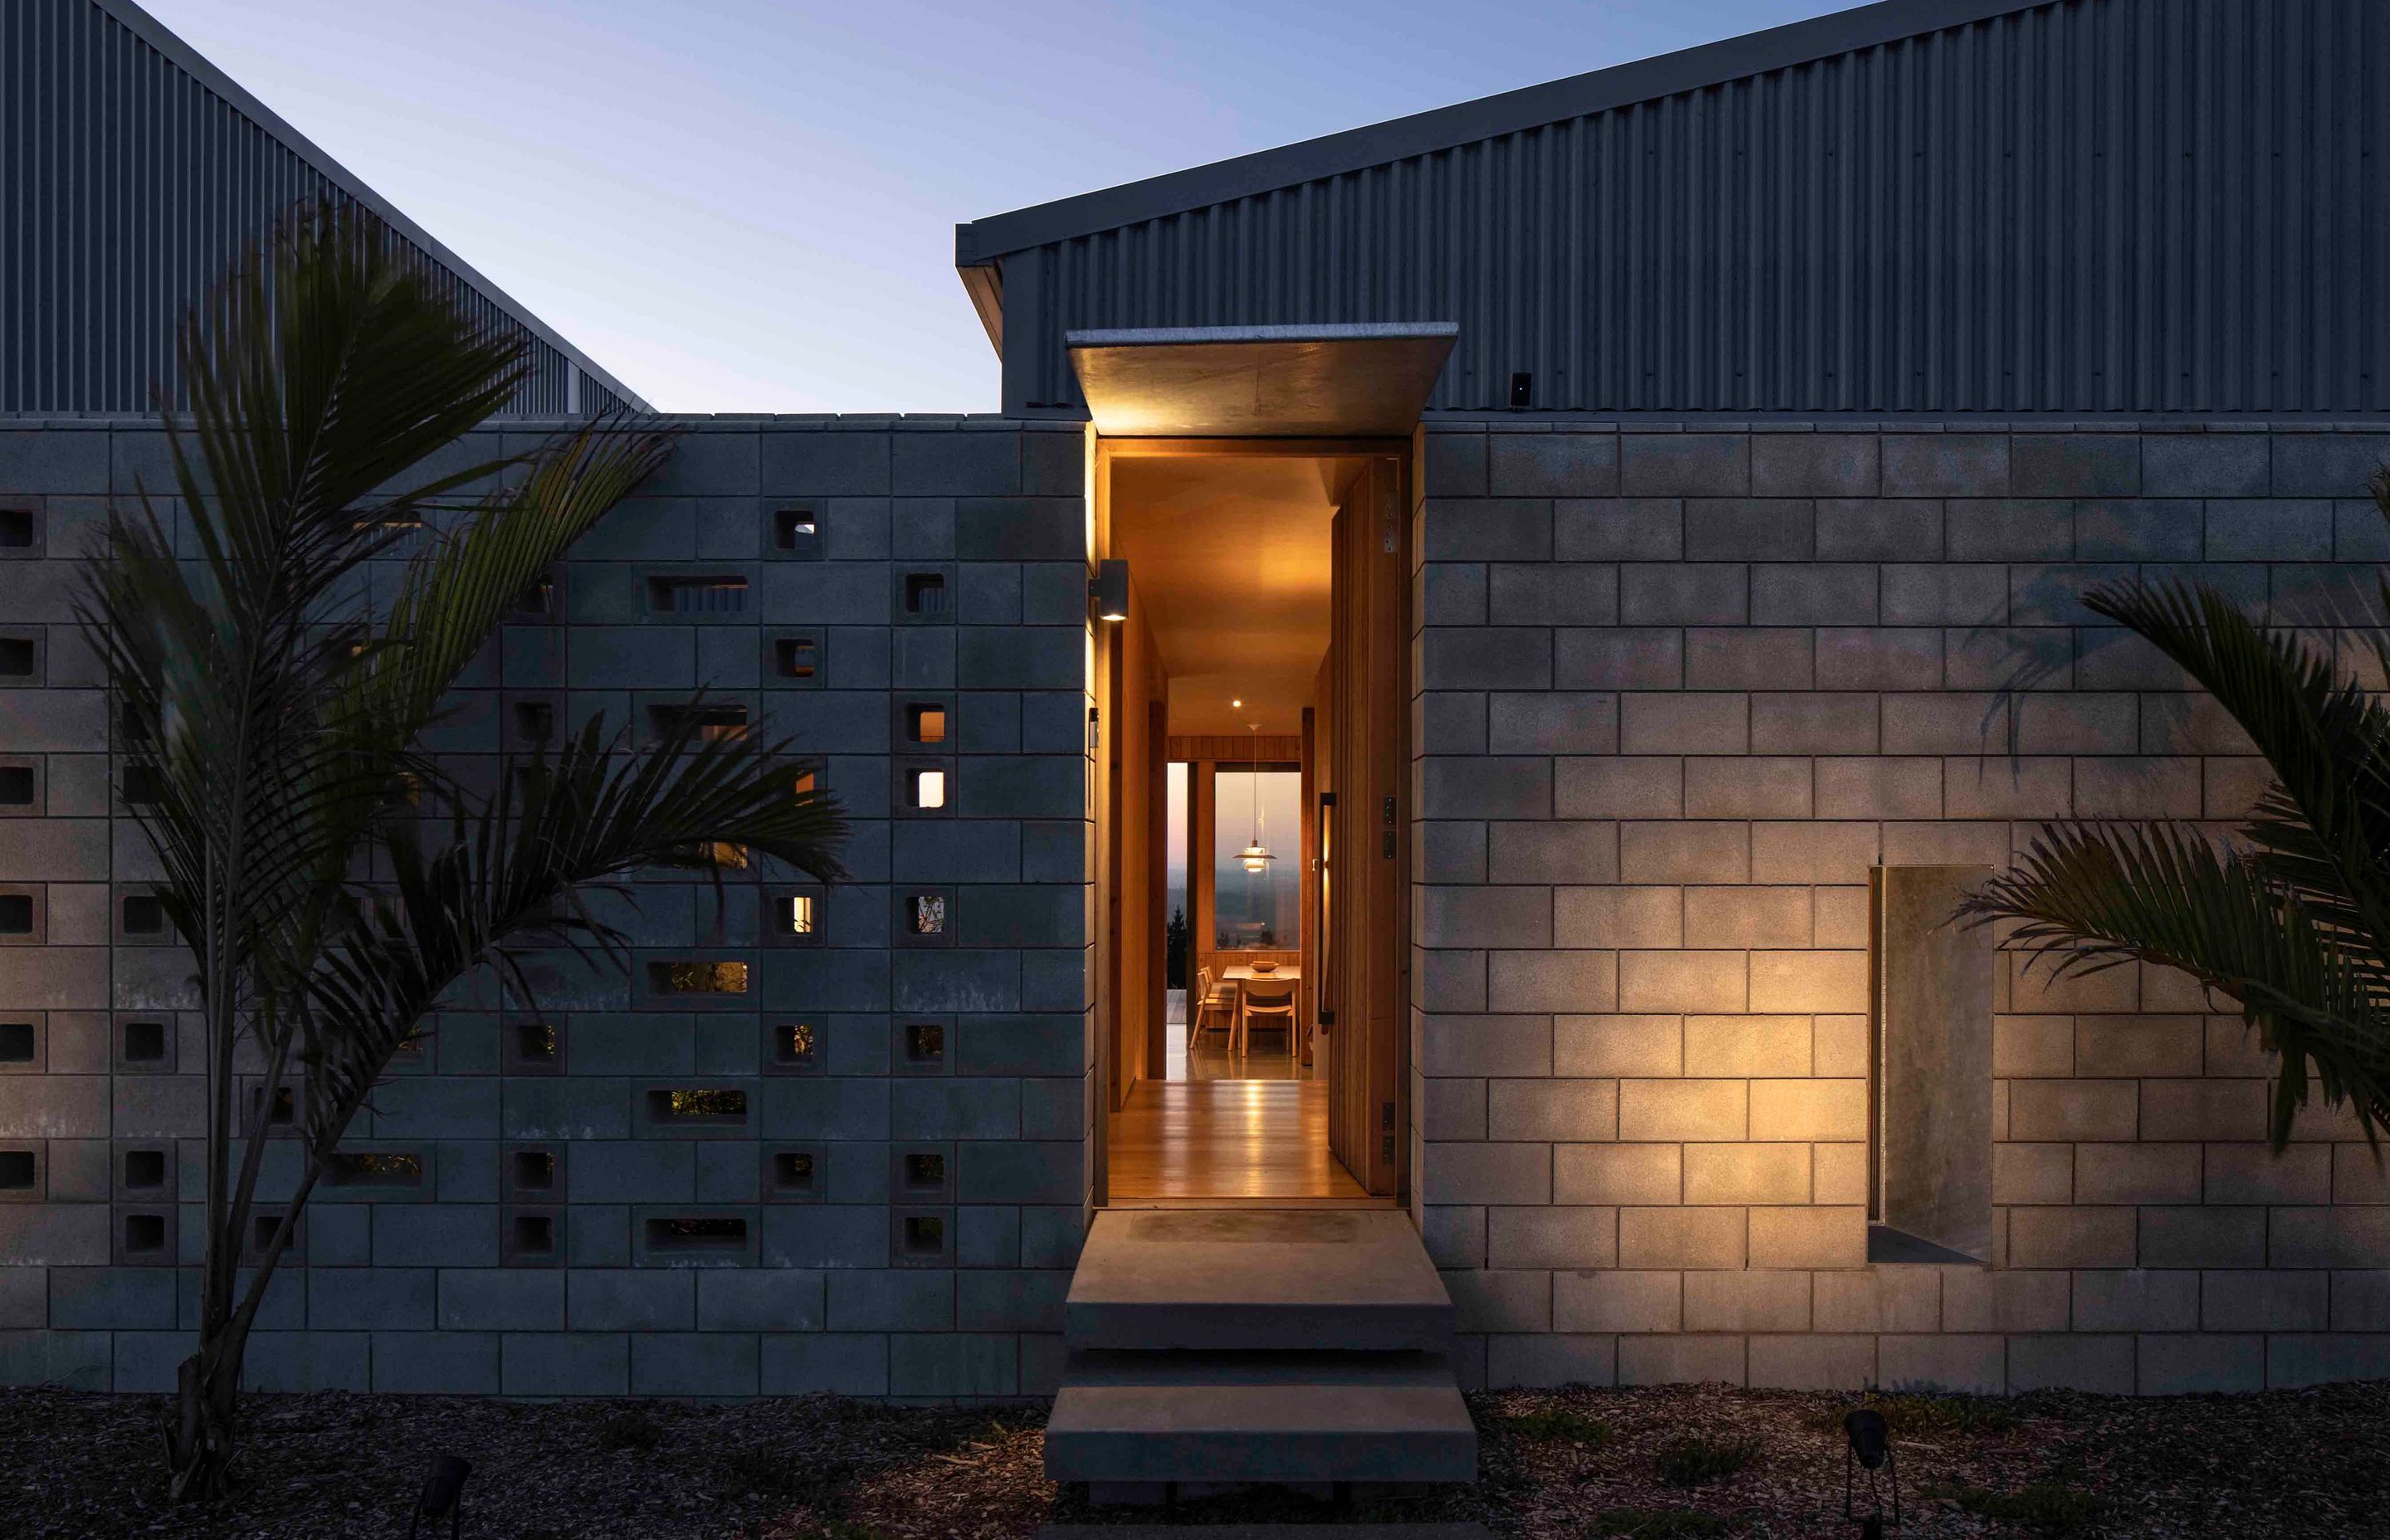 The entry way features a perforated block wall that ties directly into the structure of the home.